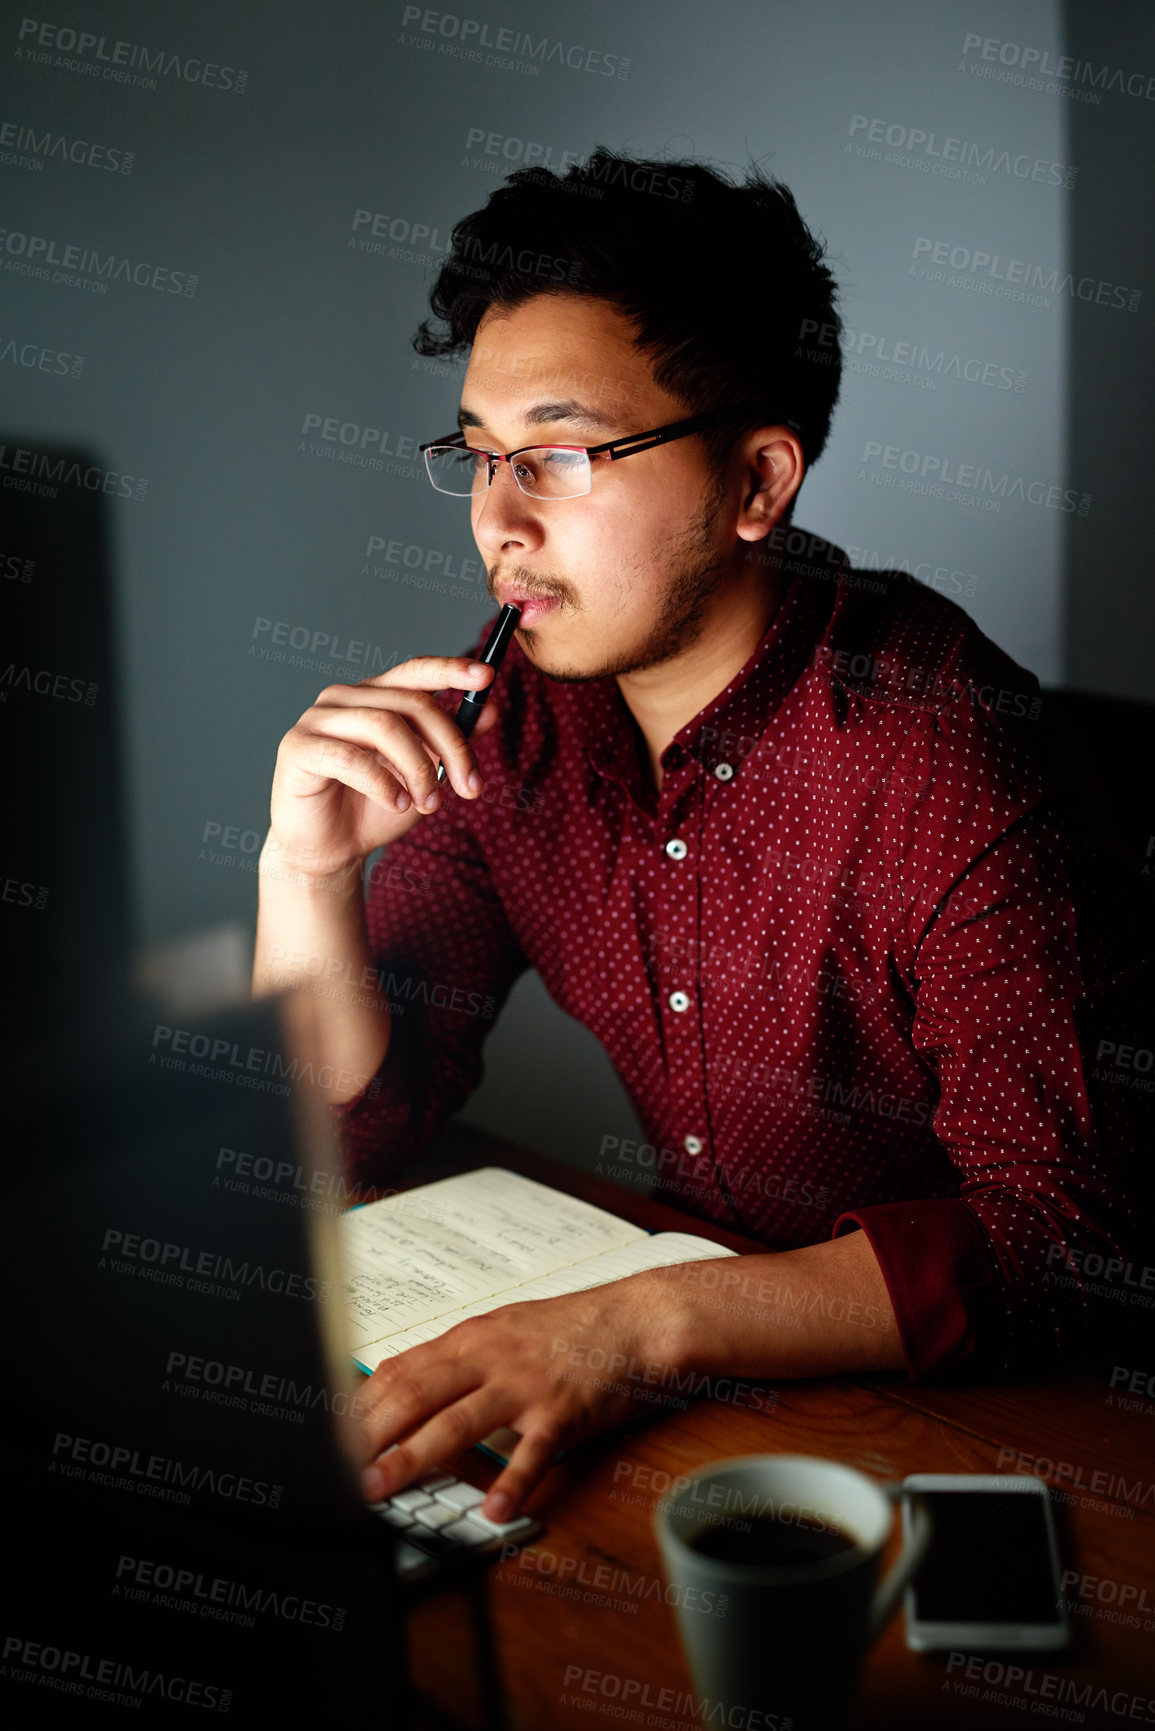 Buy stock photo Shot of a young male designer working on his computer late at night